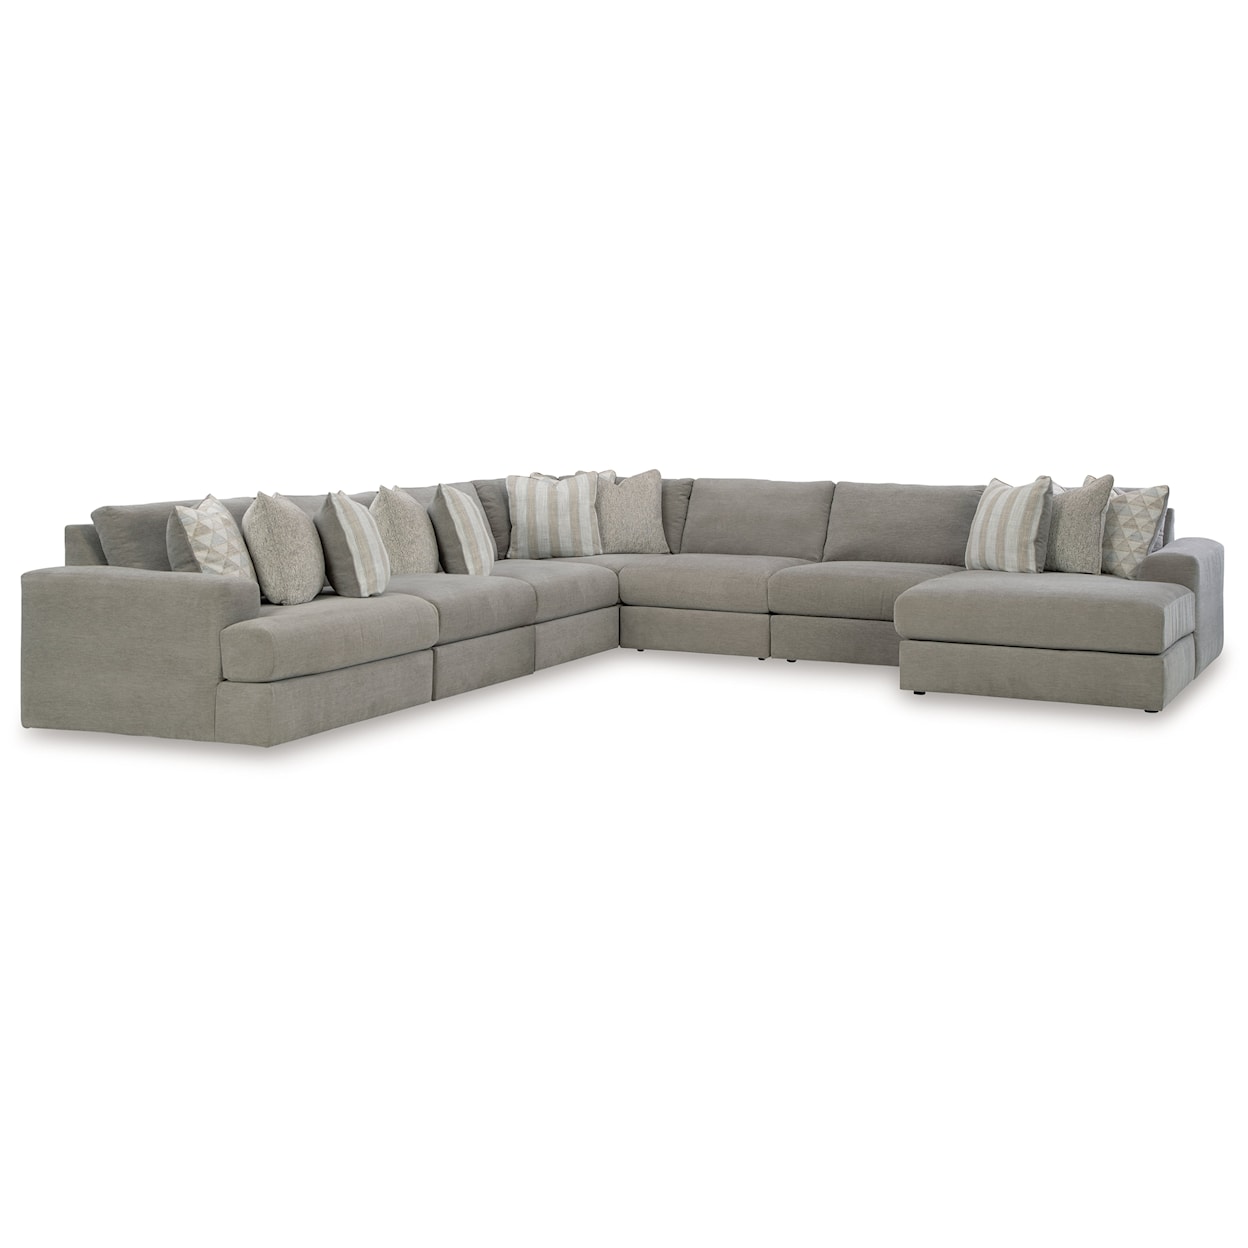 Signature Design Avaliyah 7-Piece Sectional With Chaise